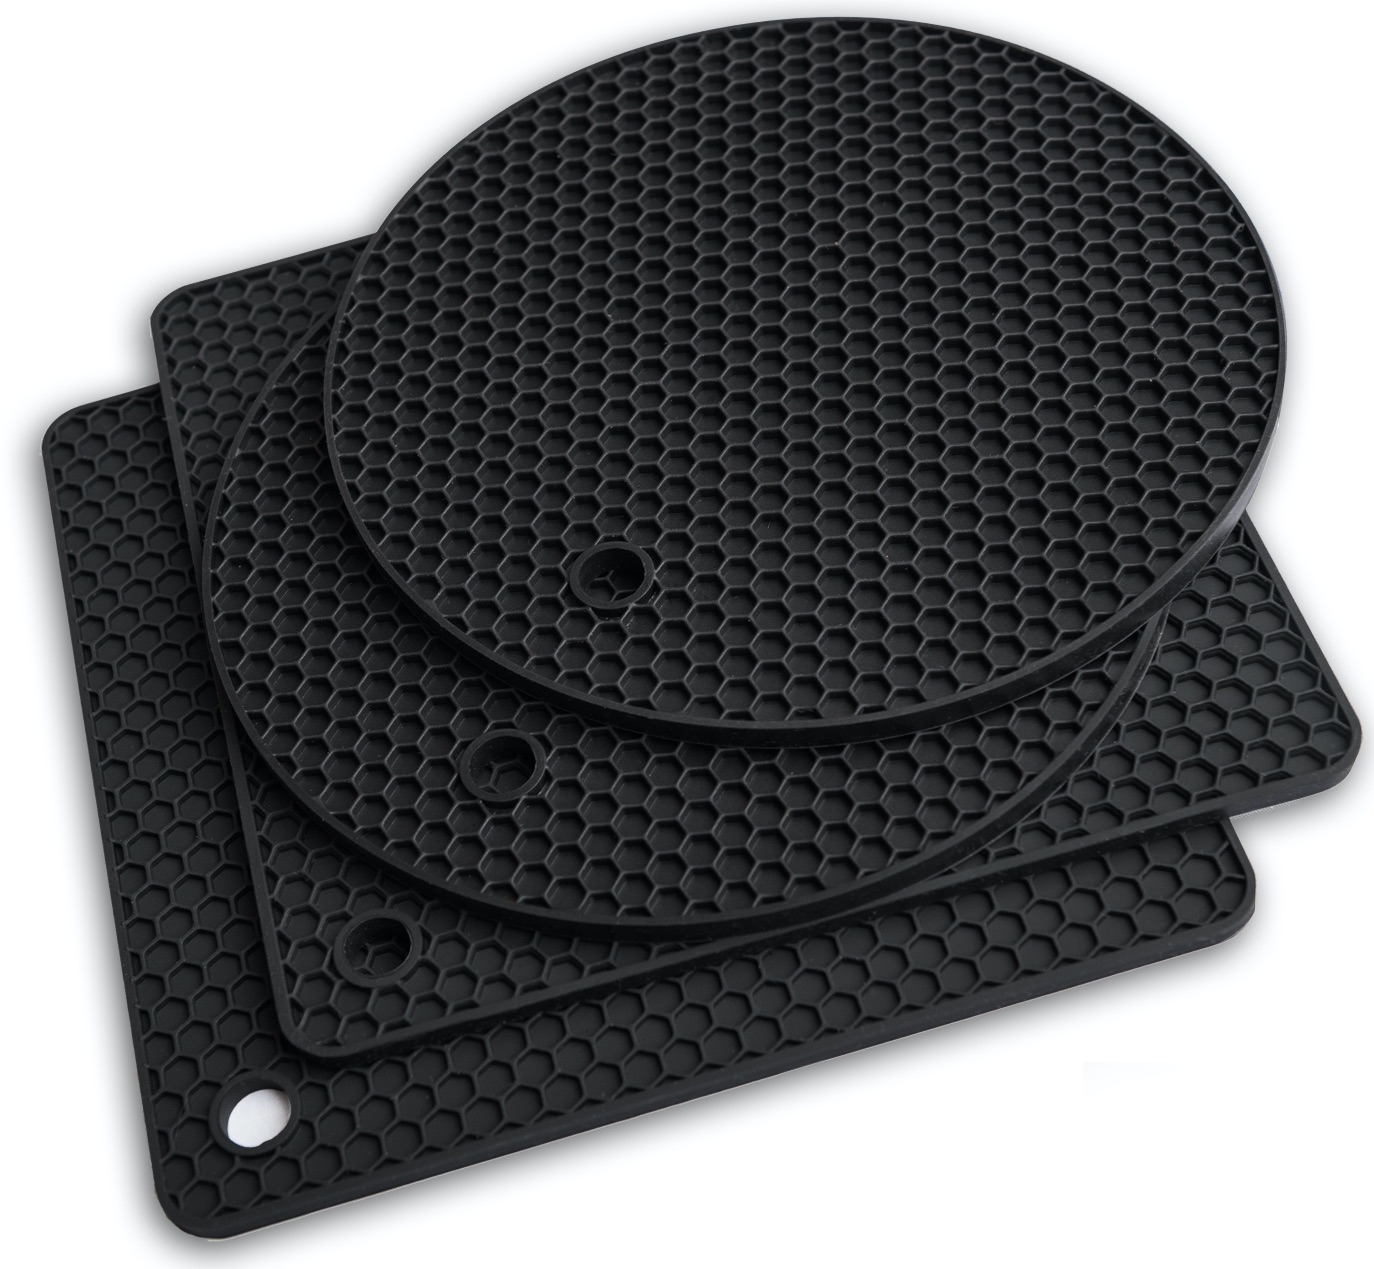 Silicone Trivet Mats - Pot Holders - Drying Mat Our potholders Kitchen  Tools is Heat Resistant to 440°F, Non-Slip Durable Flexible Easy to wash  and